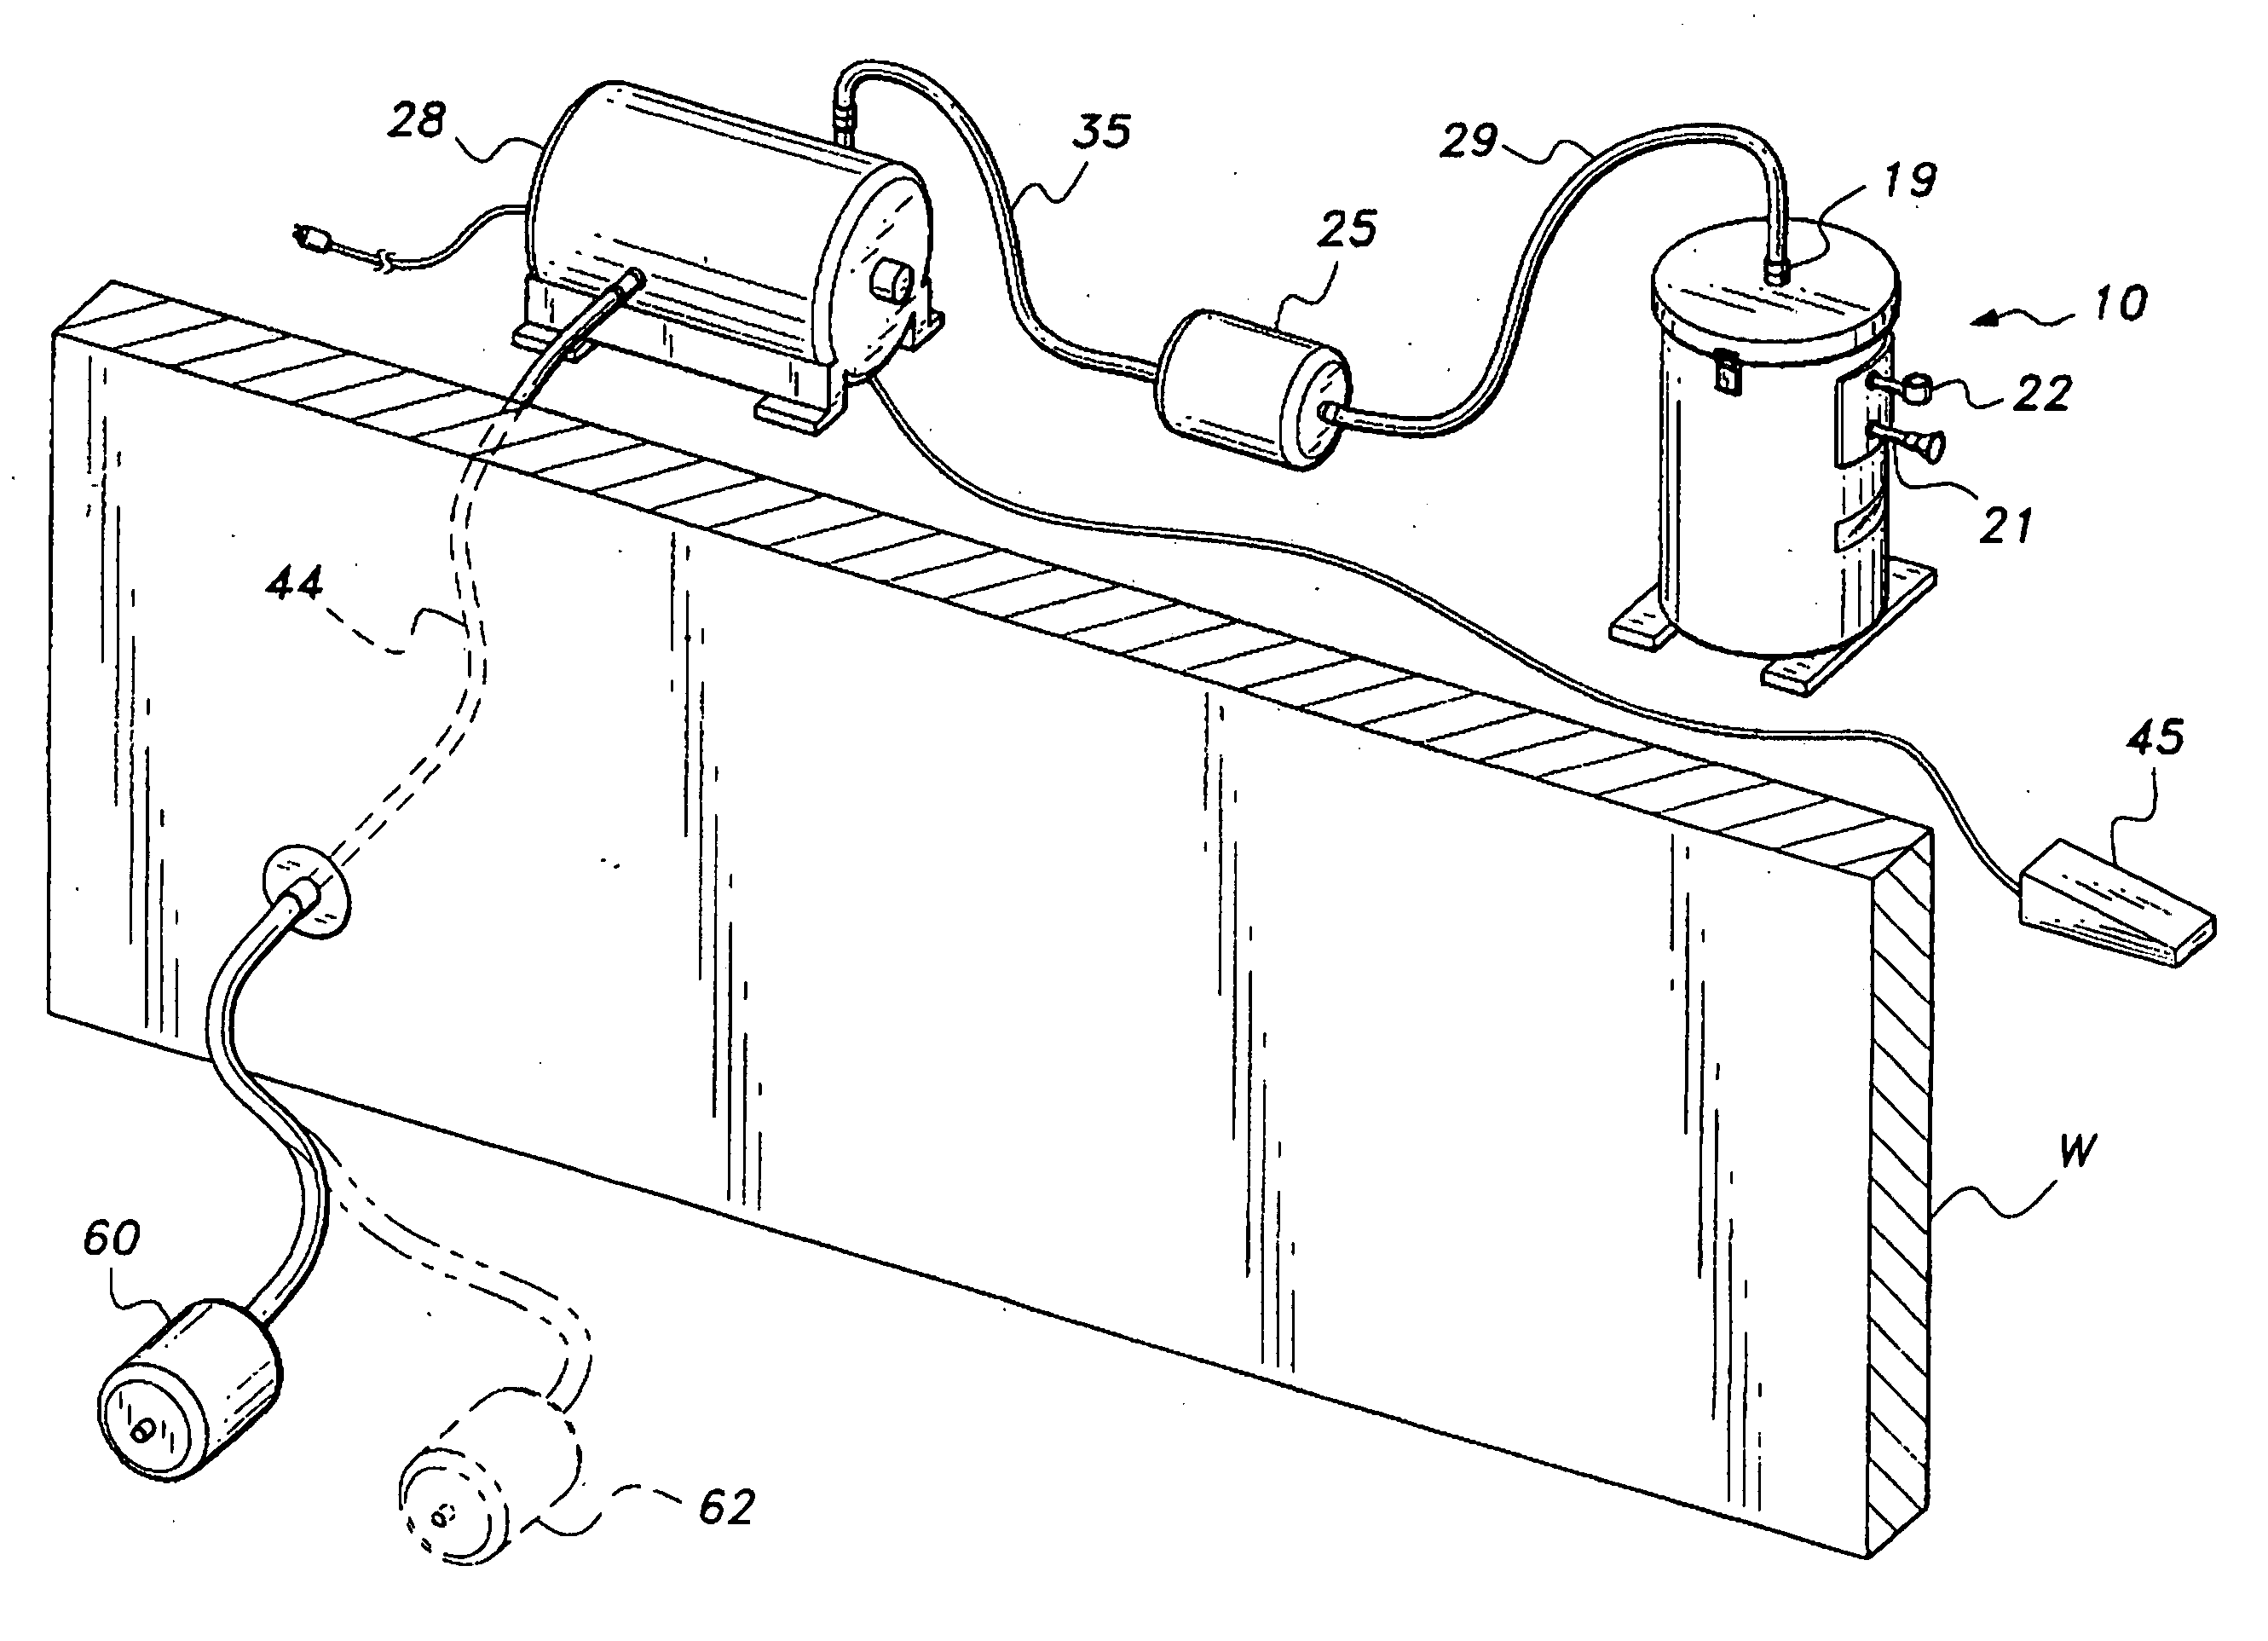 Apparatus for airbrush waste removal